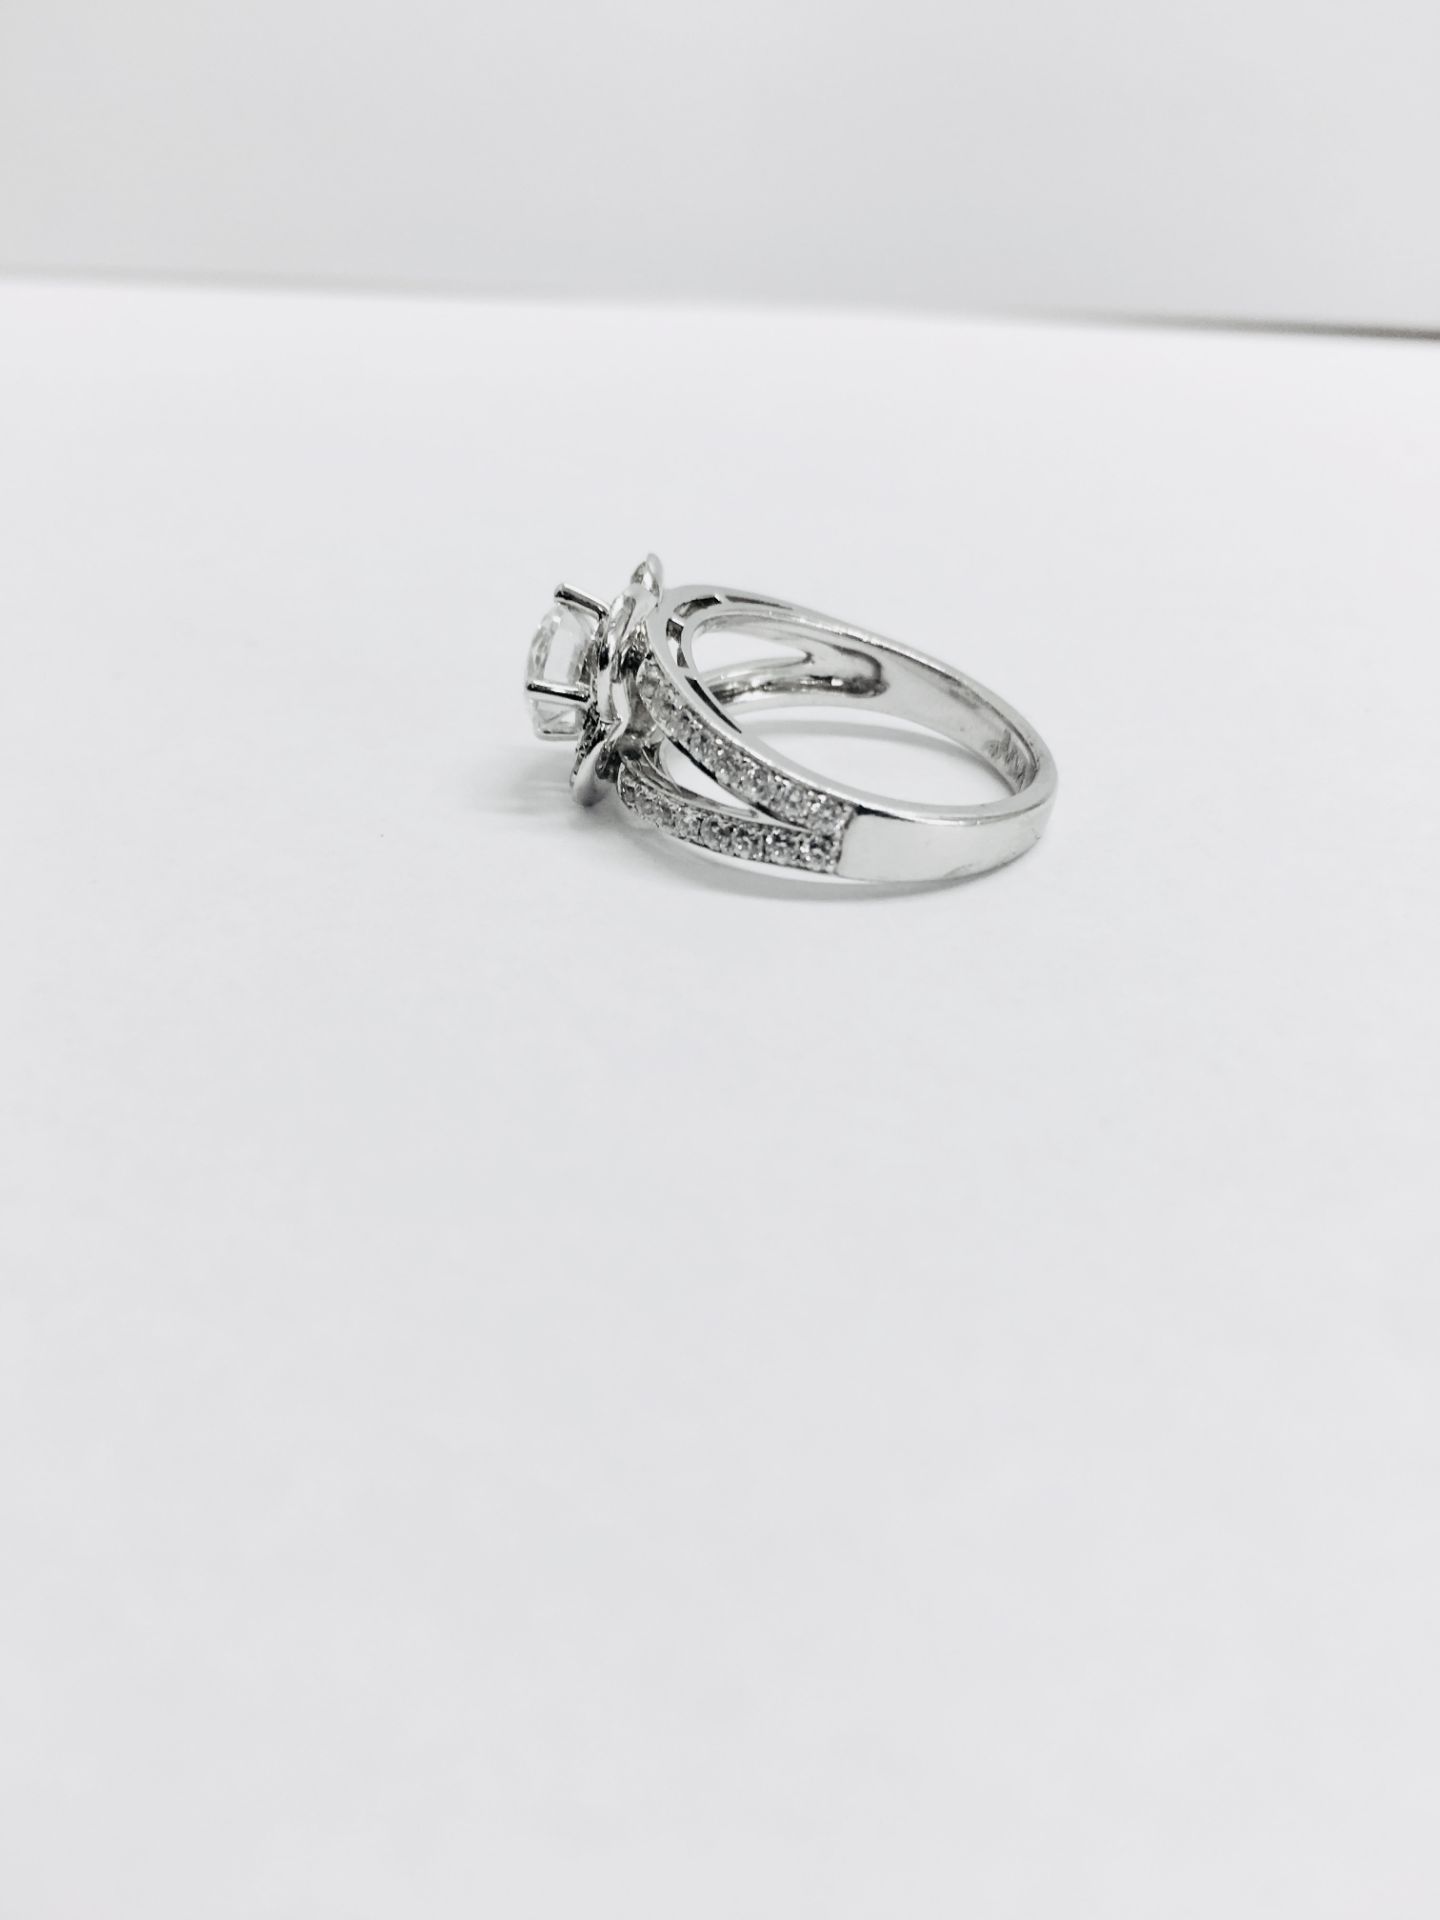 1.04ct diamond set soliatire ring in platinum. H colour and I1 clarity. Halo setting small - Image 2 of 4